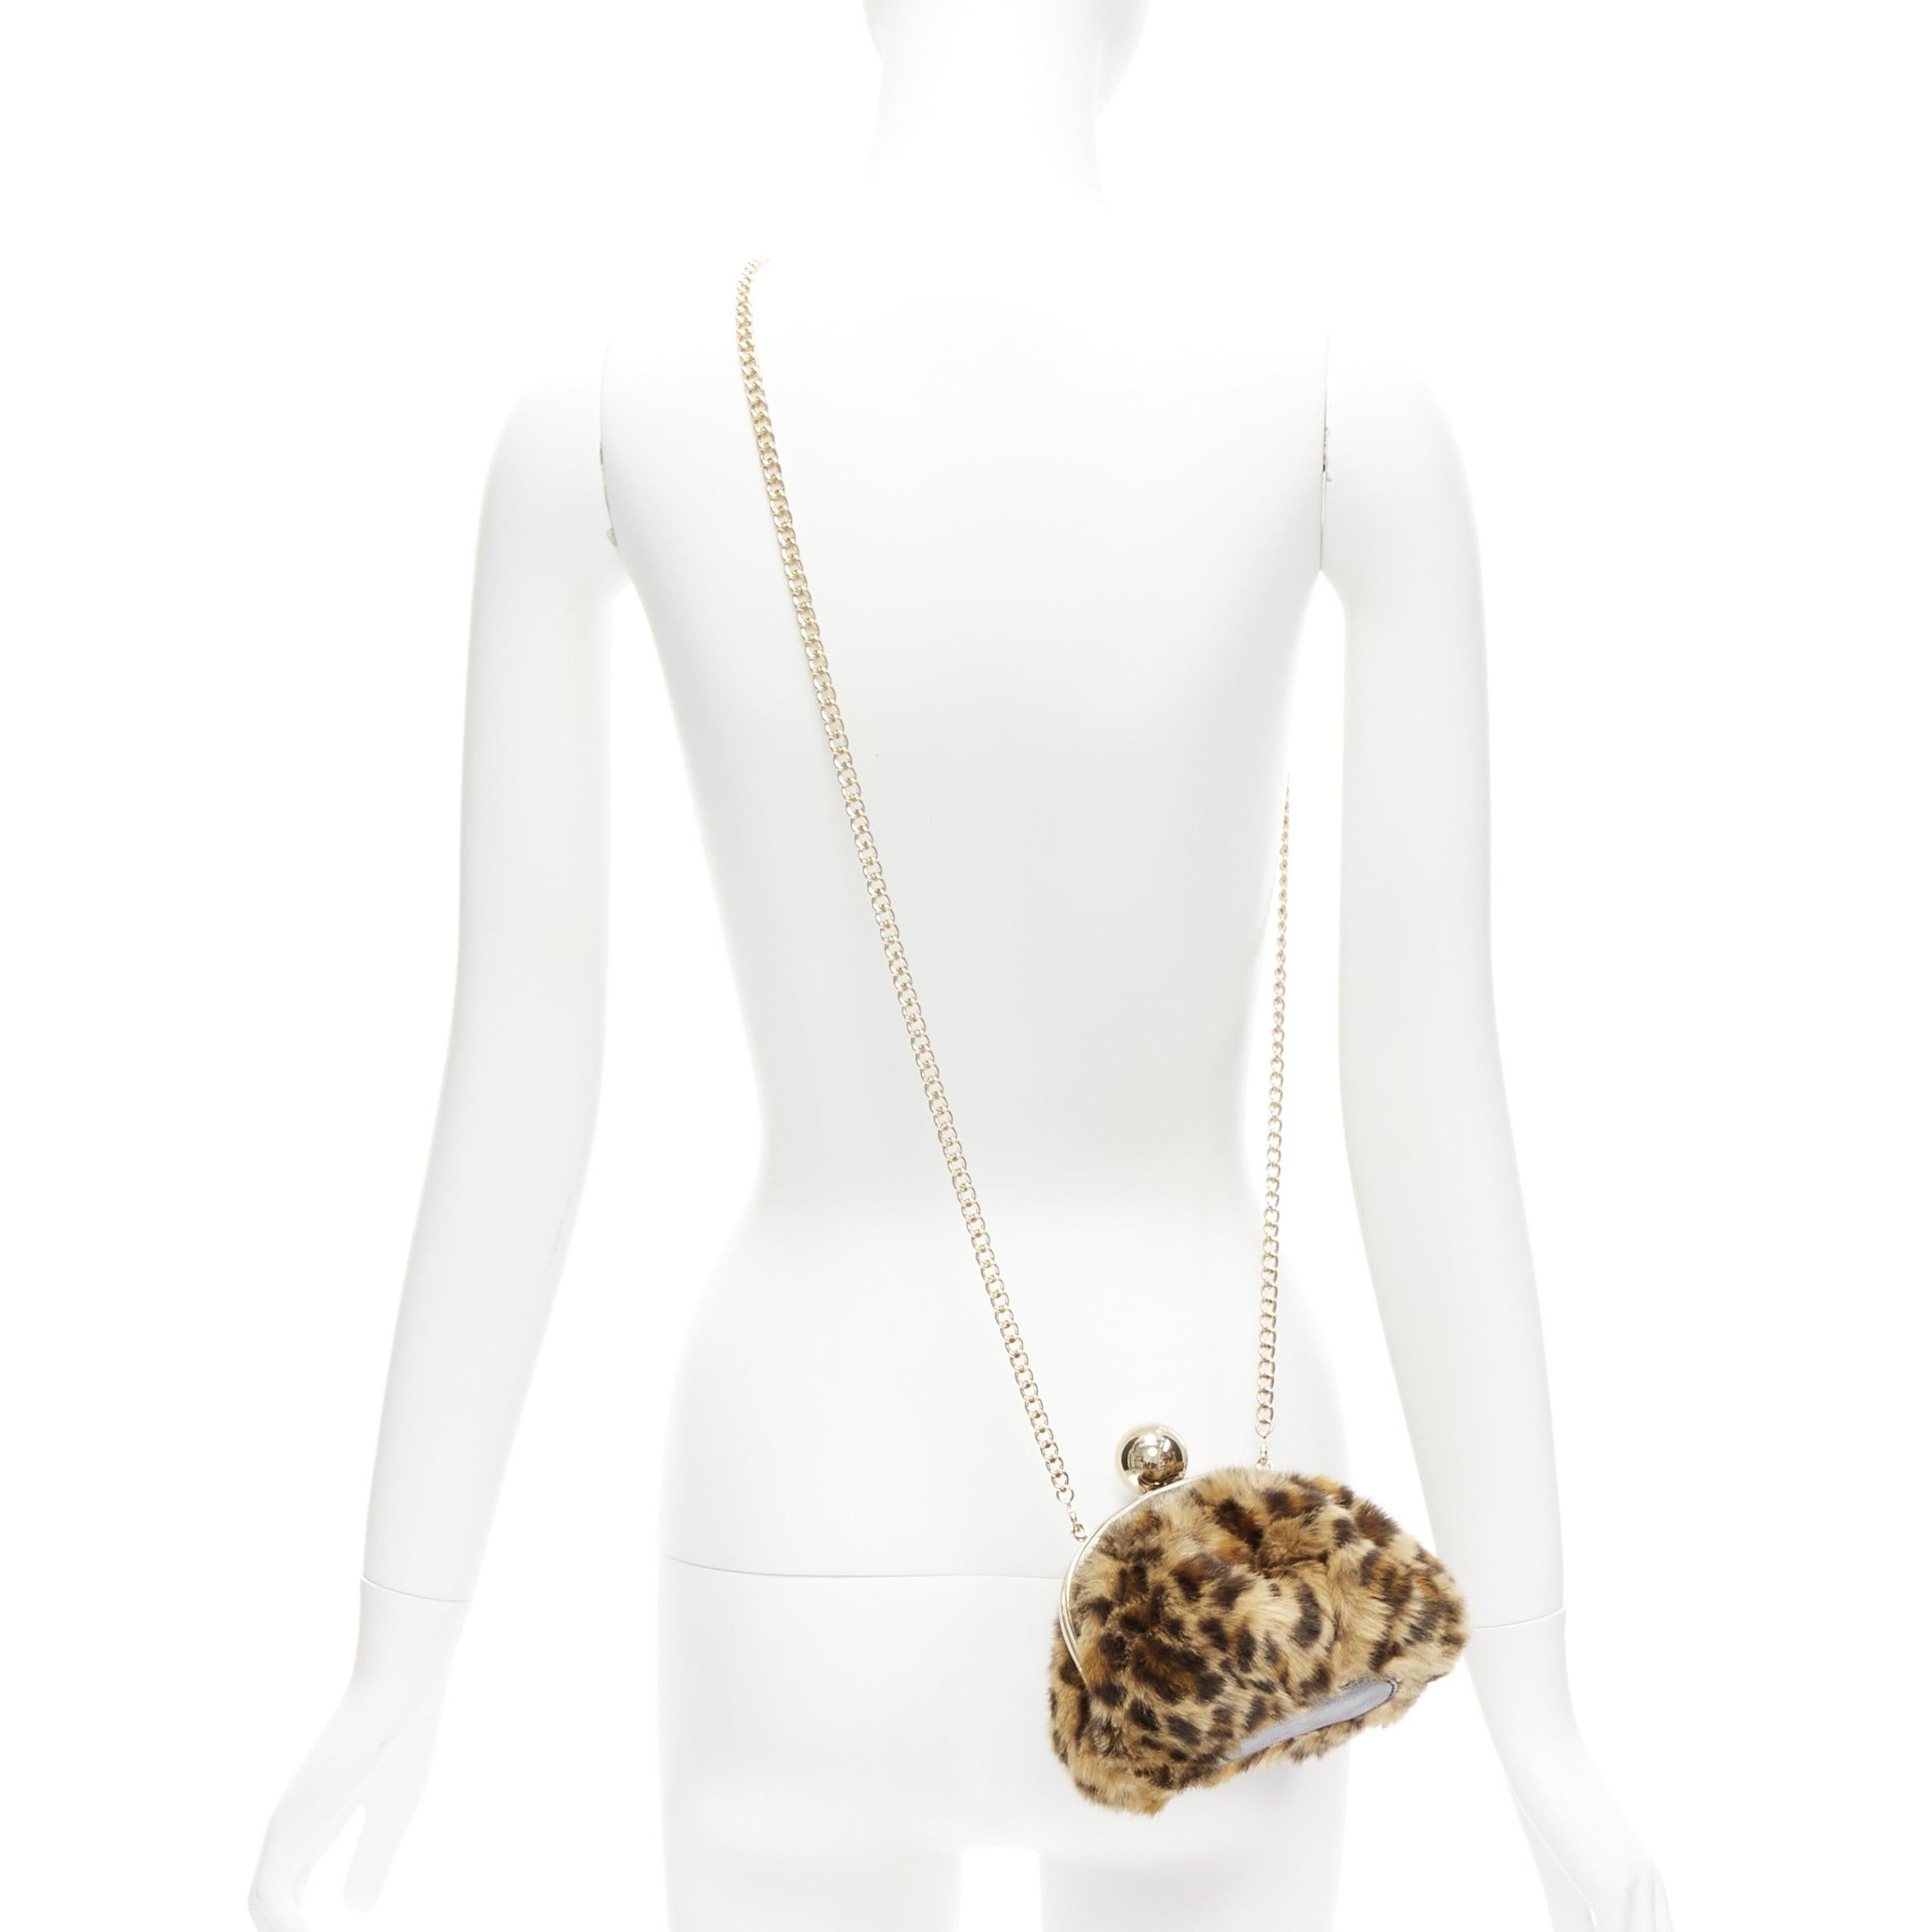 KATE SPADE brown leopard print faux fur gold ball clasp crossbody evening bag
Reference: ANWU/A01078
Brand: Kate Spade
Material: Fabric, Metal
Color: Brown, Gold
Pattern: Leopard
Closure: Clasp
Lining: Beige Fabric
Extra Details: Detachable chain